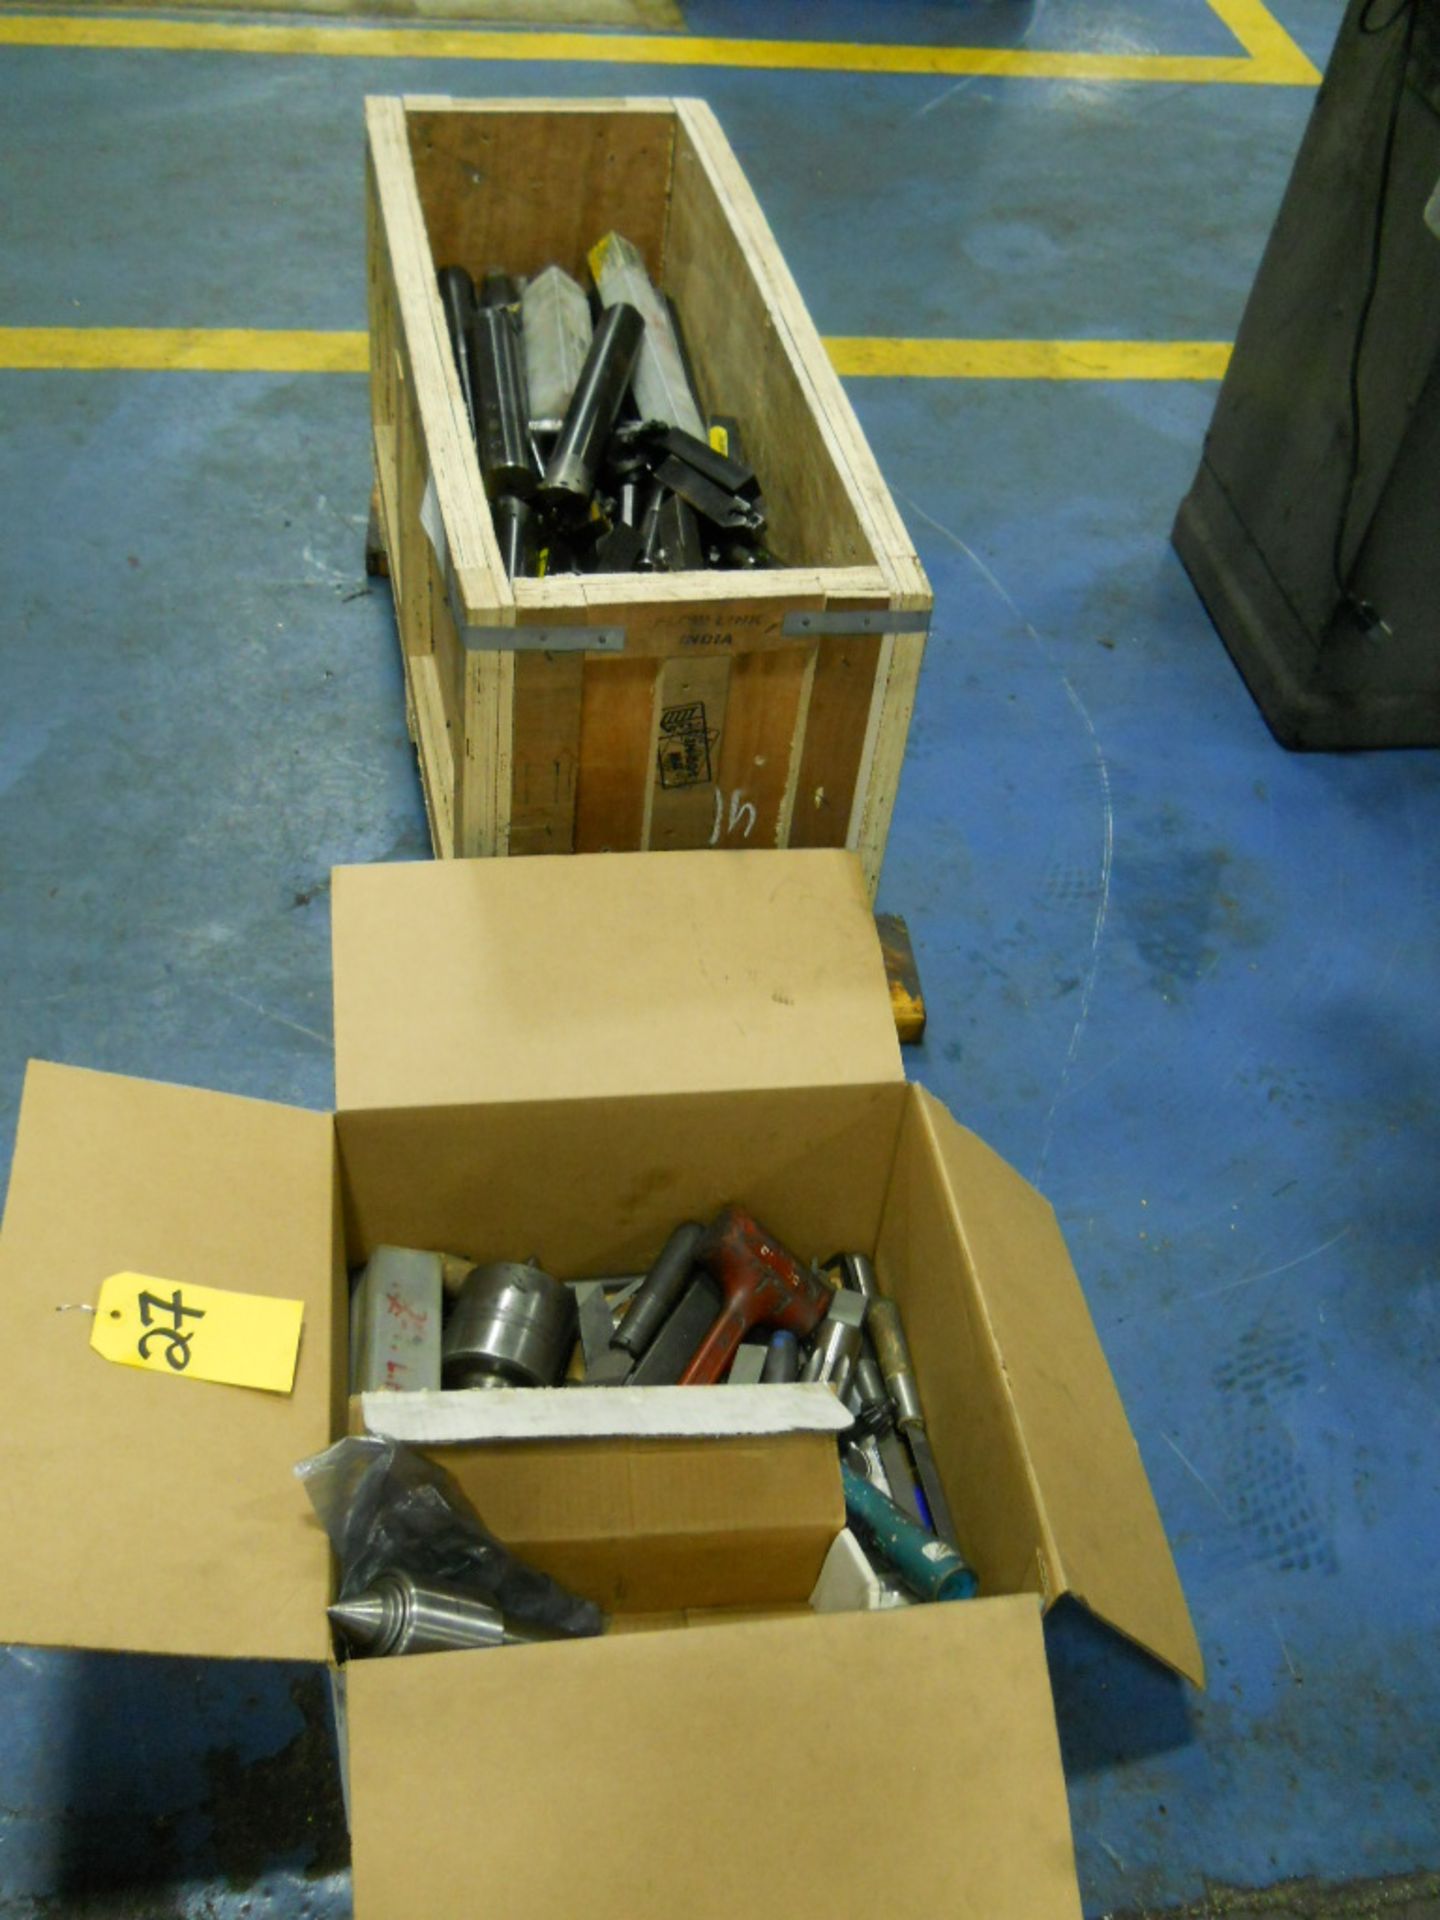 LOT OF: (1) BOX OF HAND TOOLS, (1) CRATE OF BORING BARS, TURNING TOOLS - Image 3 of 3